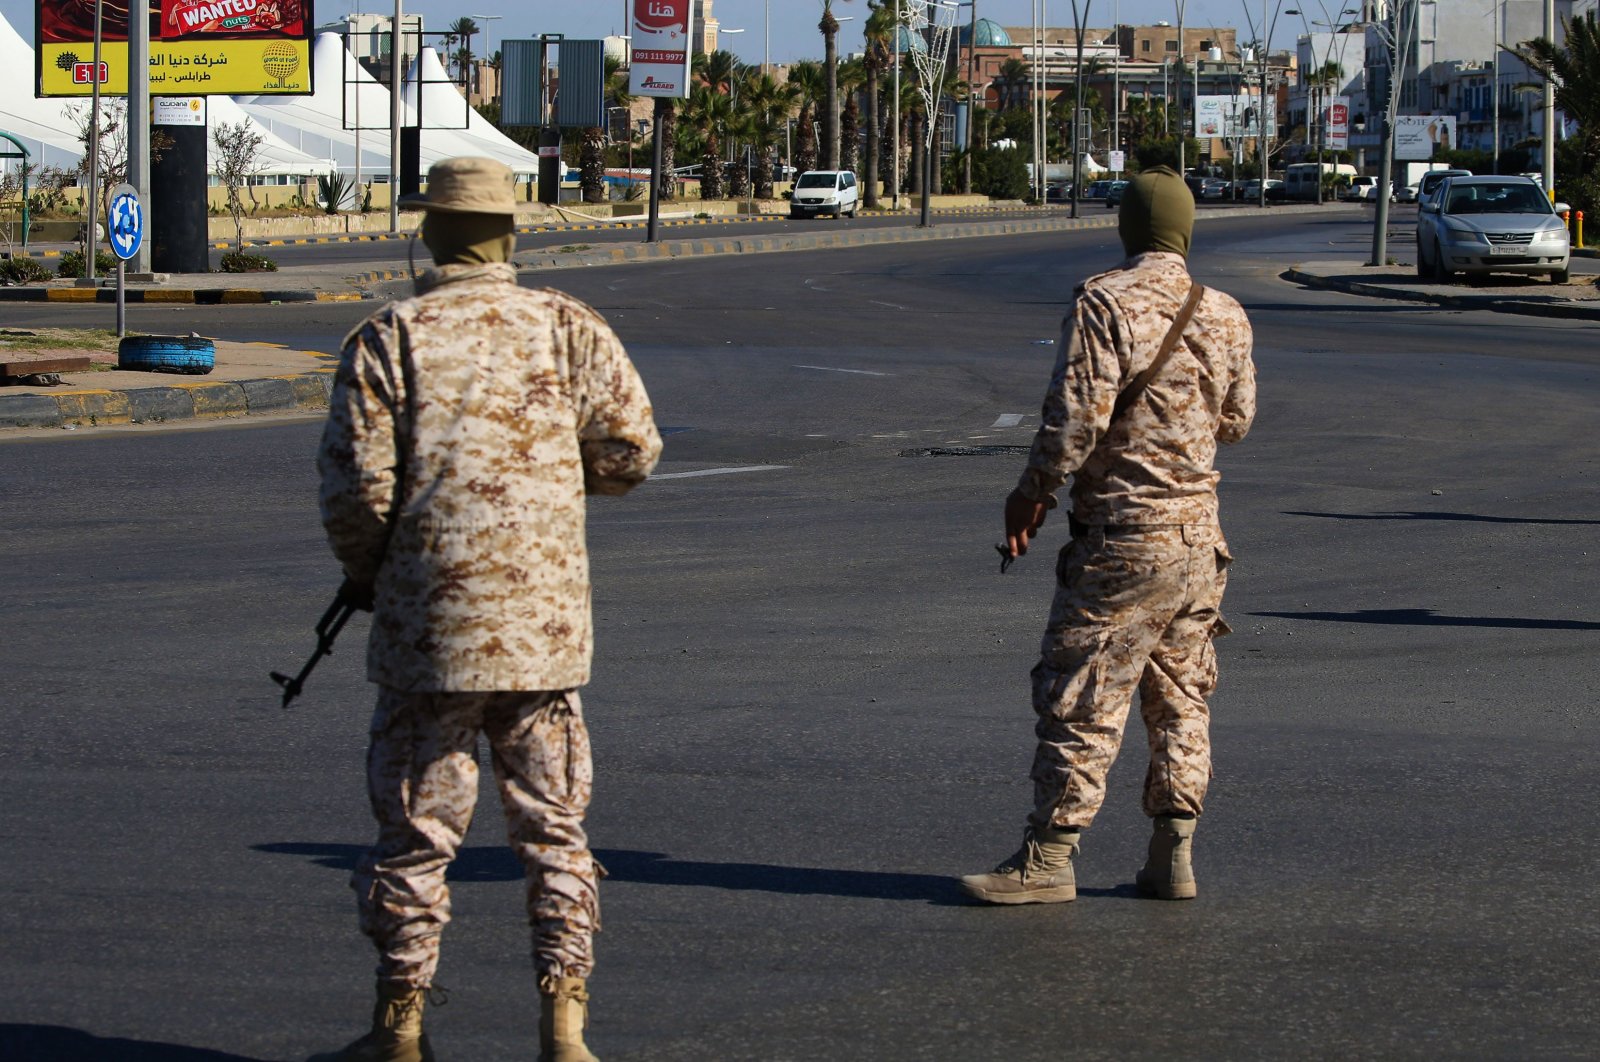 Members of the Libyan security forces man a checkpoint in the capital Tripoli, to ensure that the strict measures taken by the authorities to stem the spread of the novel coronavirus are respected, on April 10, 2020. (AFP Photo)